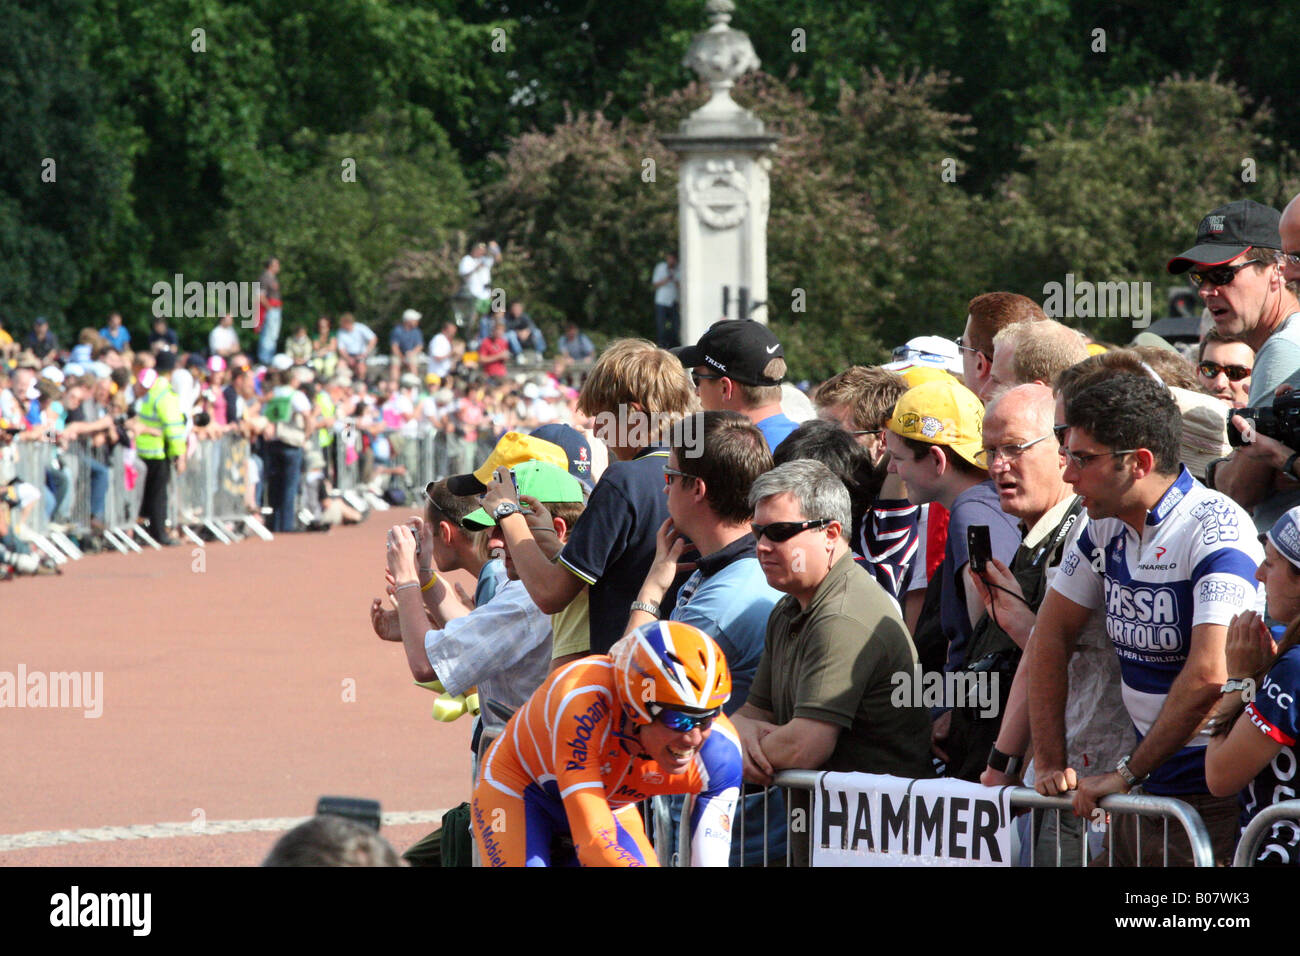 Rabobank racing cyclist outside Buckingham Palace in the 2007 Tour de France prologue Stock Photo